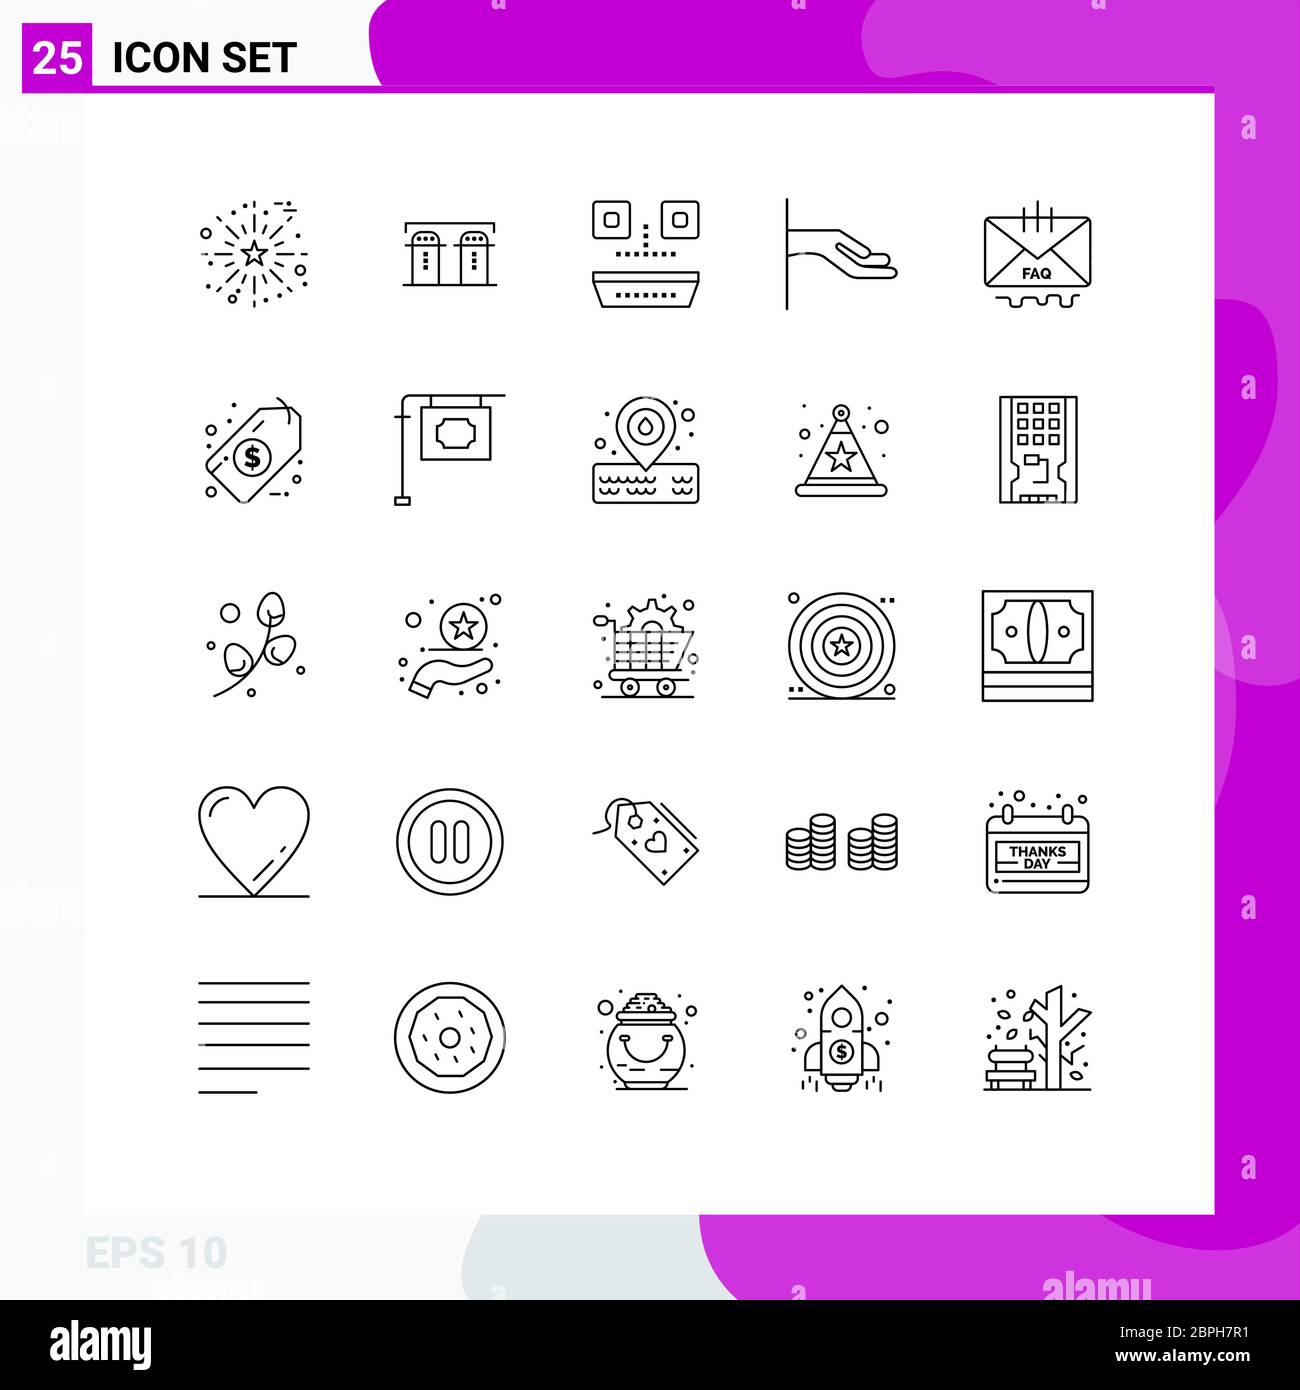 Set of 25 Modern UI Icons Symbols Signs for email, communication, fish, share, alms Editable Vector Design Elements Stock Vector